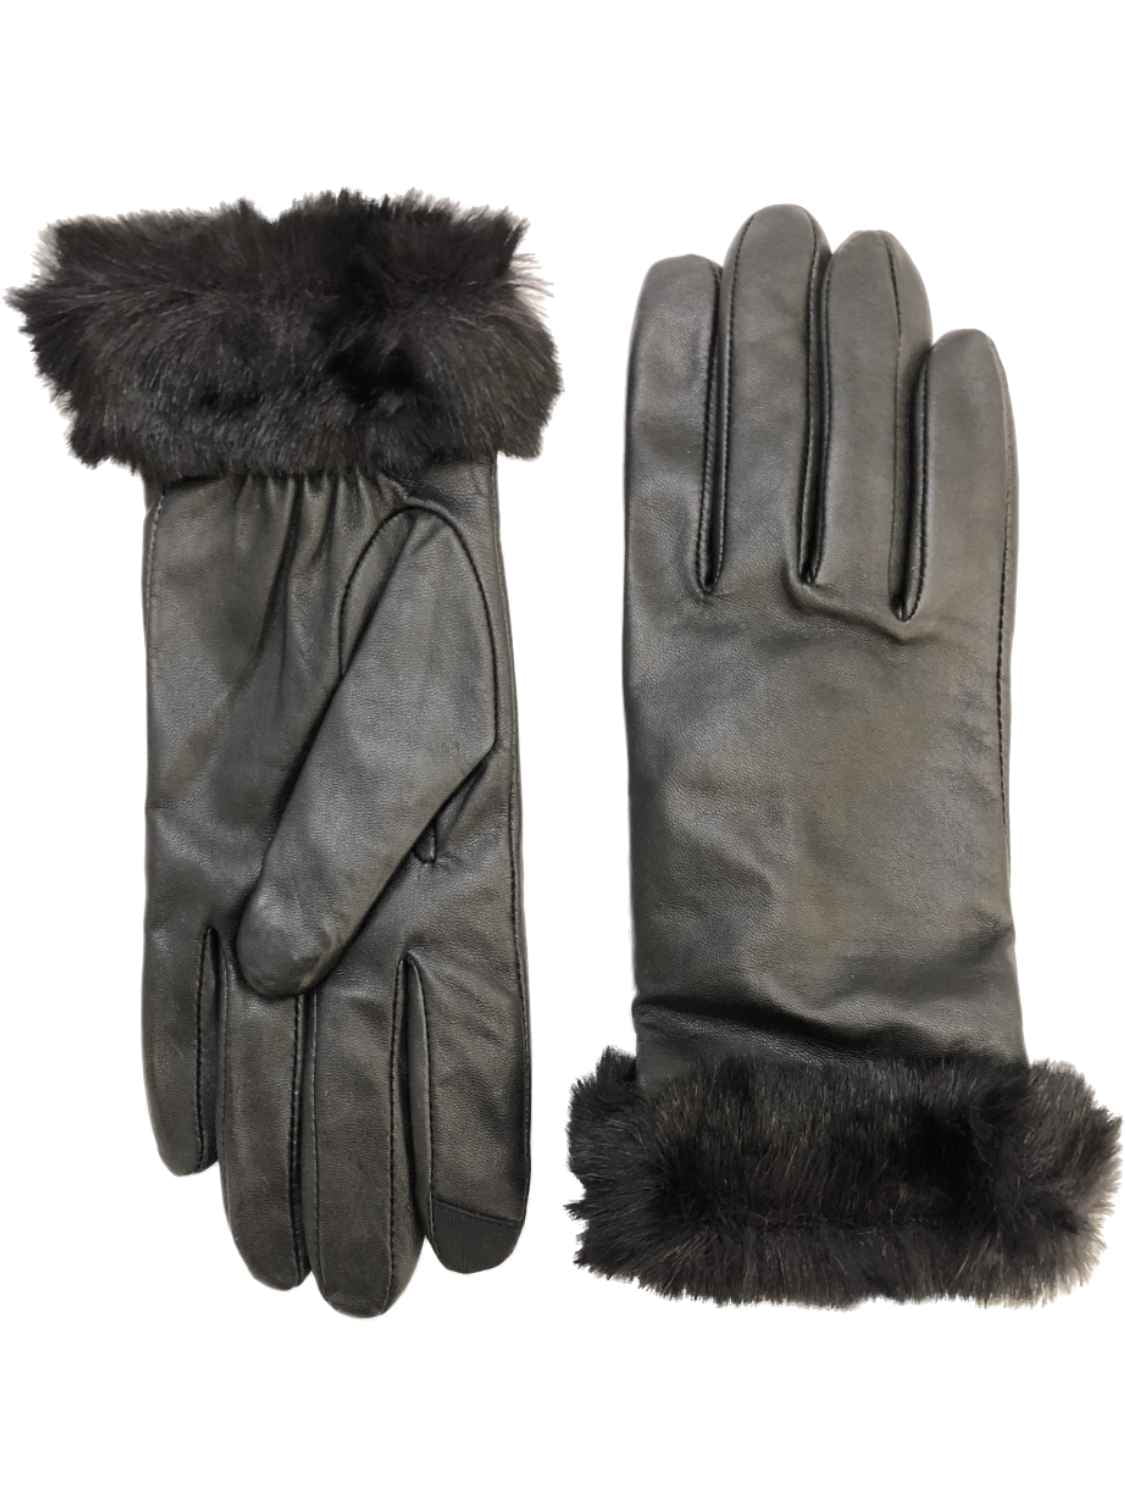 Winter Gloves Surell Mens Grey and Black Acrylic Knit Mitten Cold Weather Clothing 